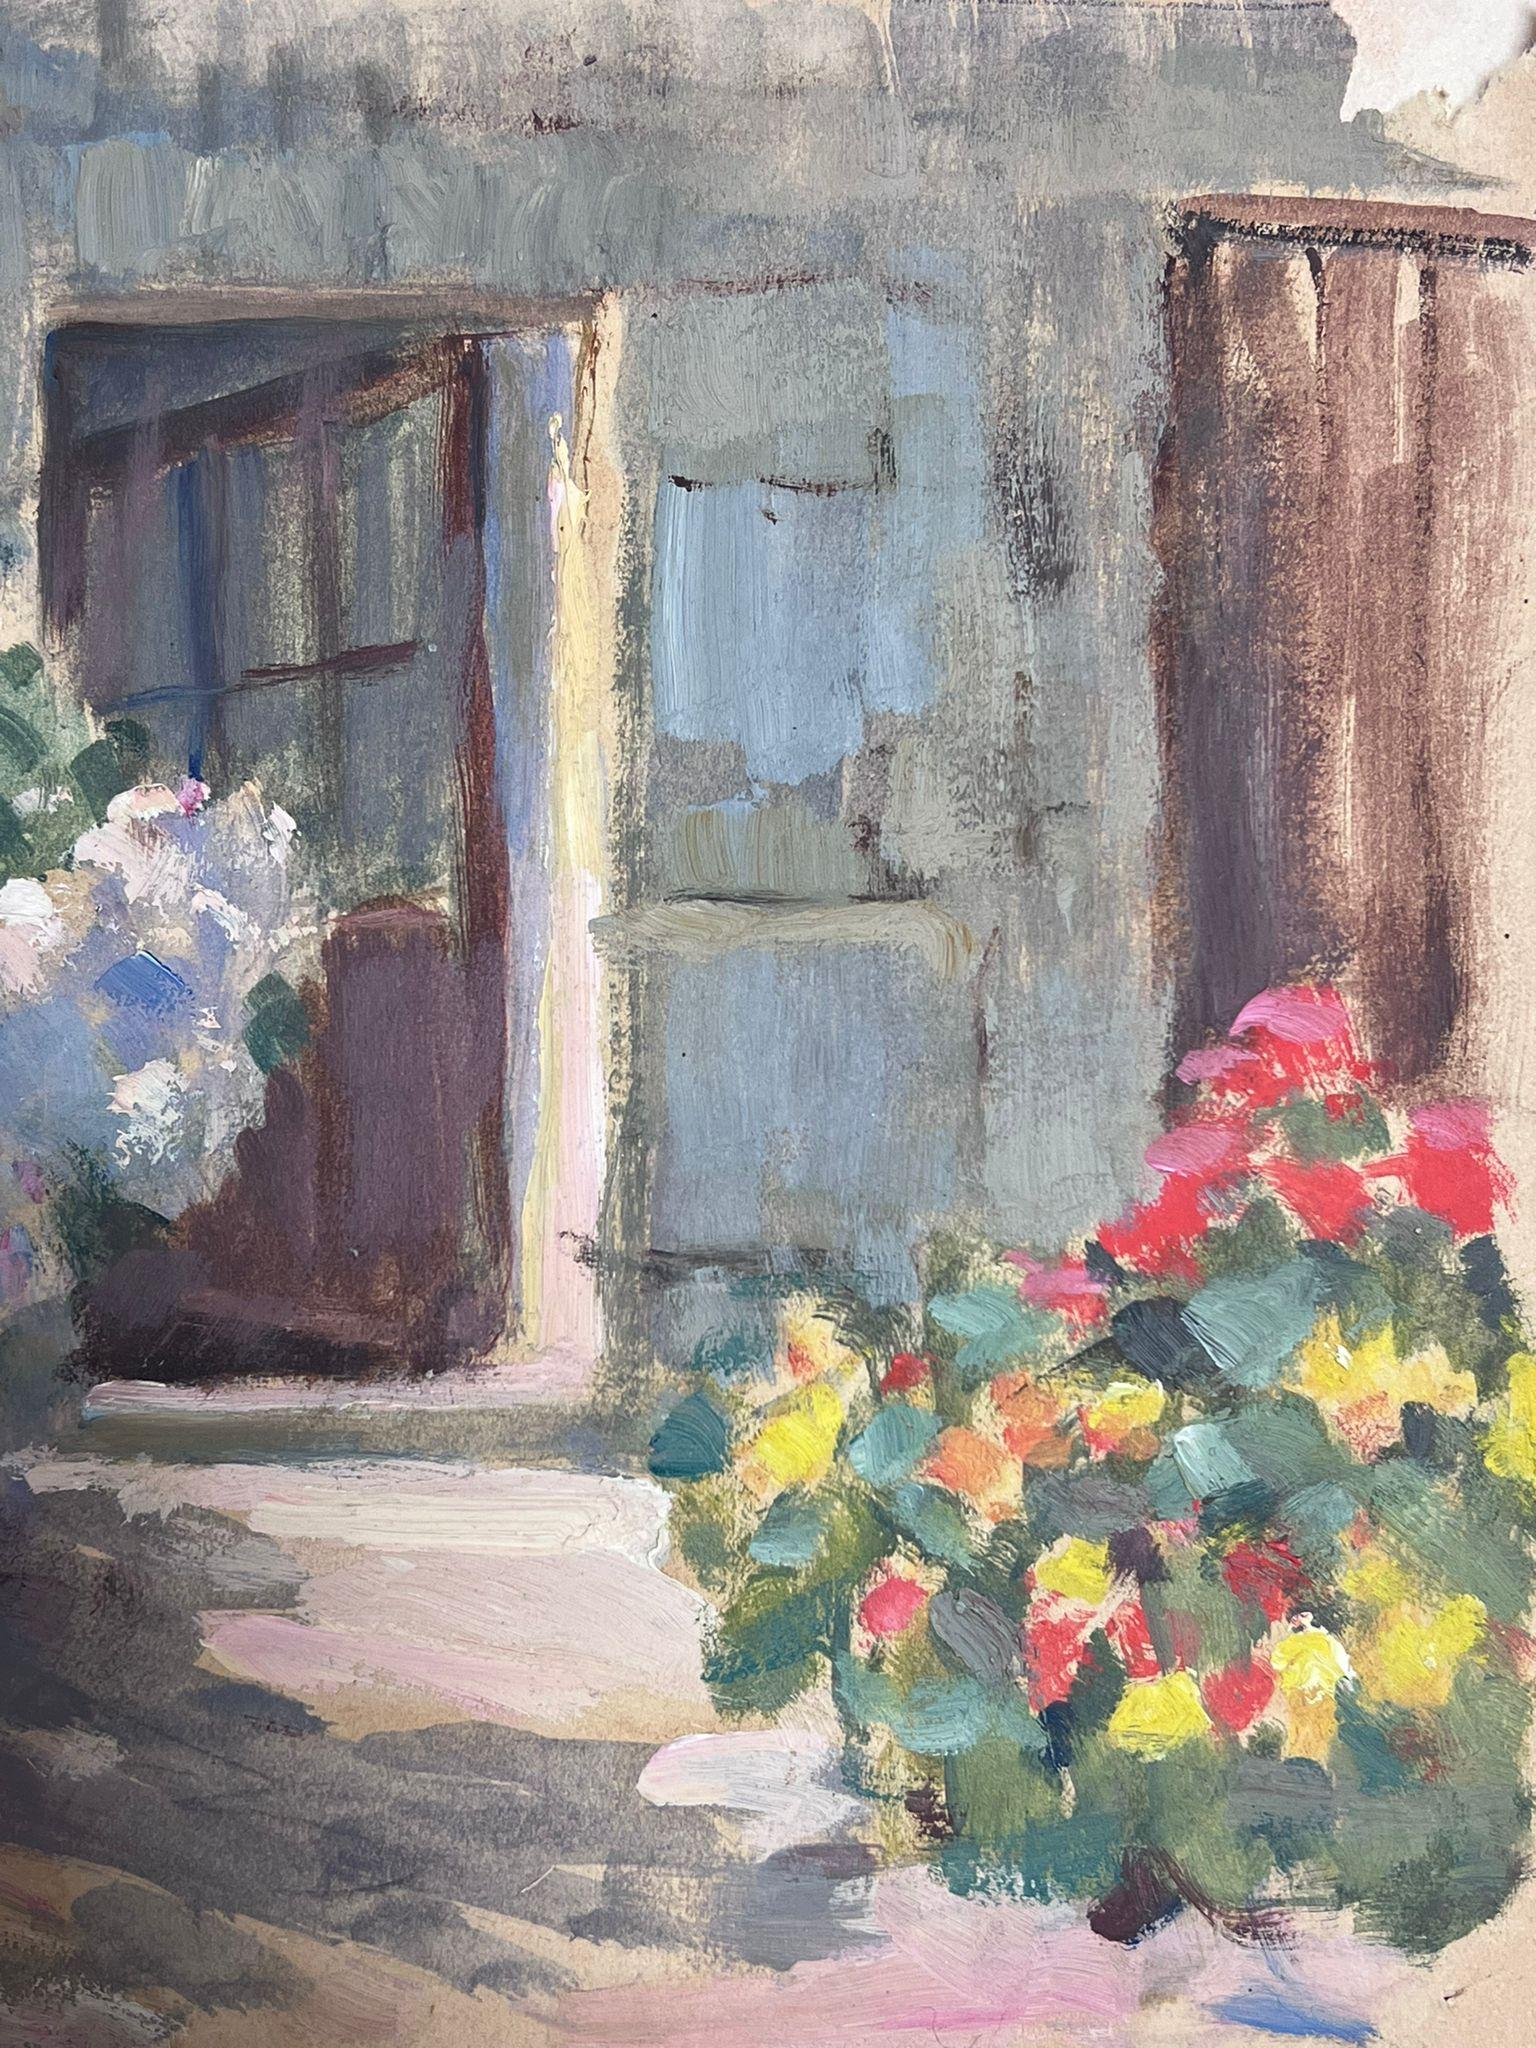 Chateau Flower Garden
by Louise Alix, French 1950's Impressionist 
oil on artist paper, unframed
painting: 8 x 10 inches
provenance: from a large private collection of this artists work in Northern France
condition: original, good and sound